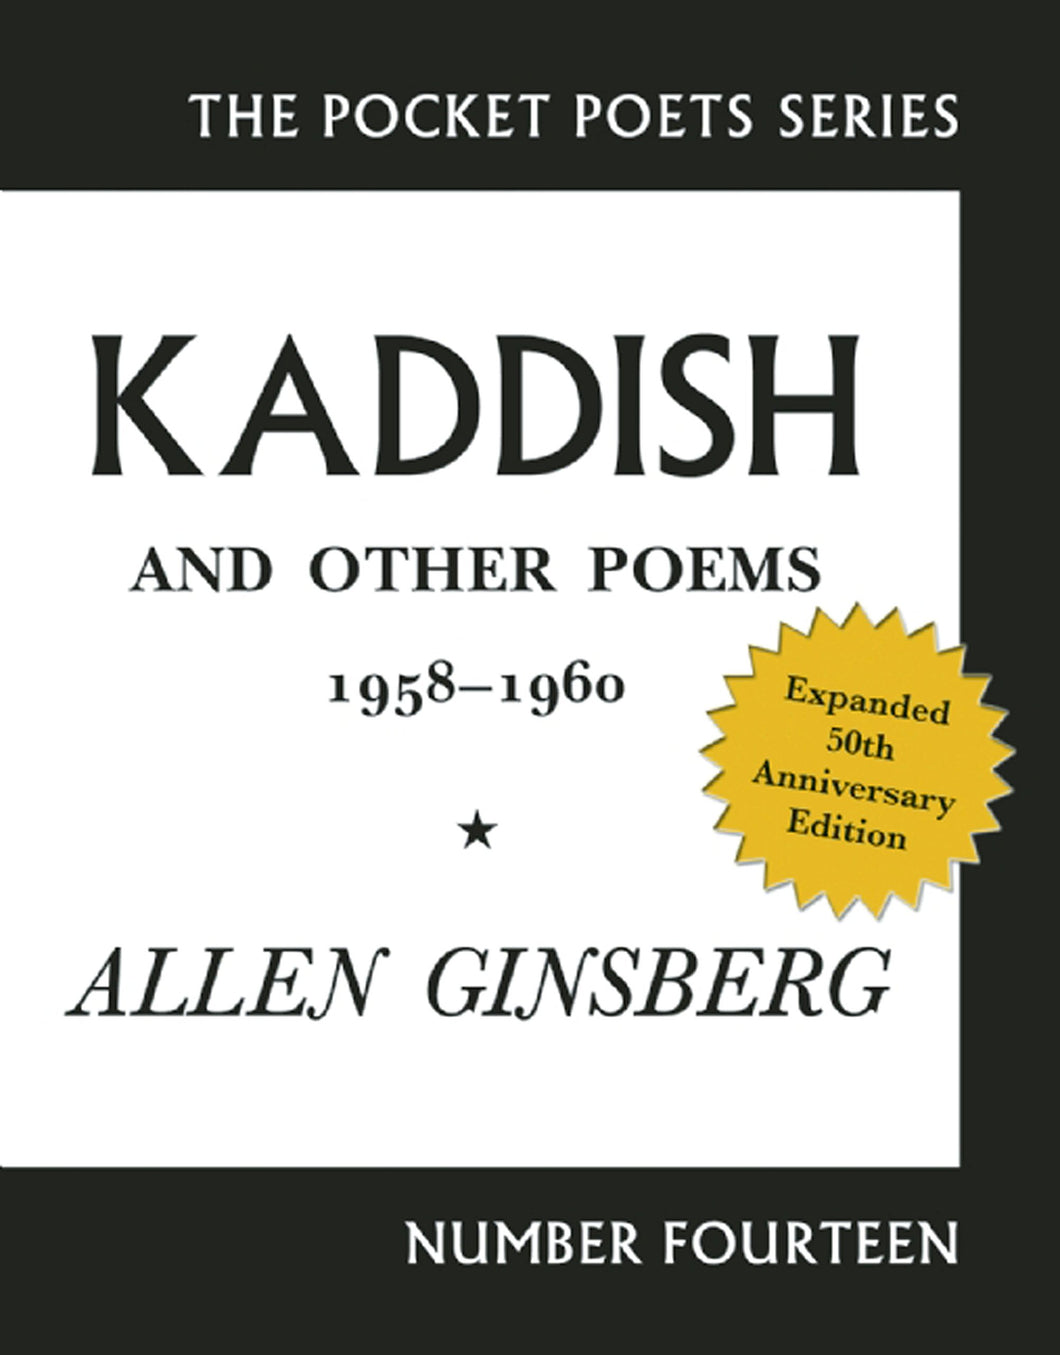 Kaddish and Other Poems (50th Anniversary Edition) by Allen Ginsberg